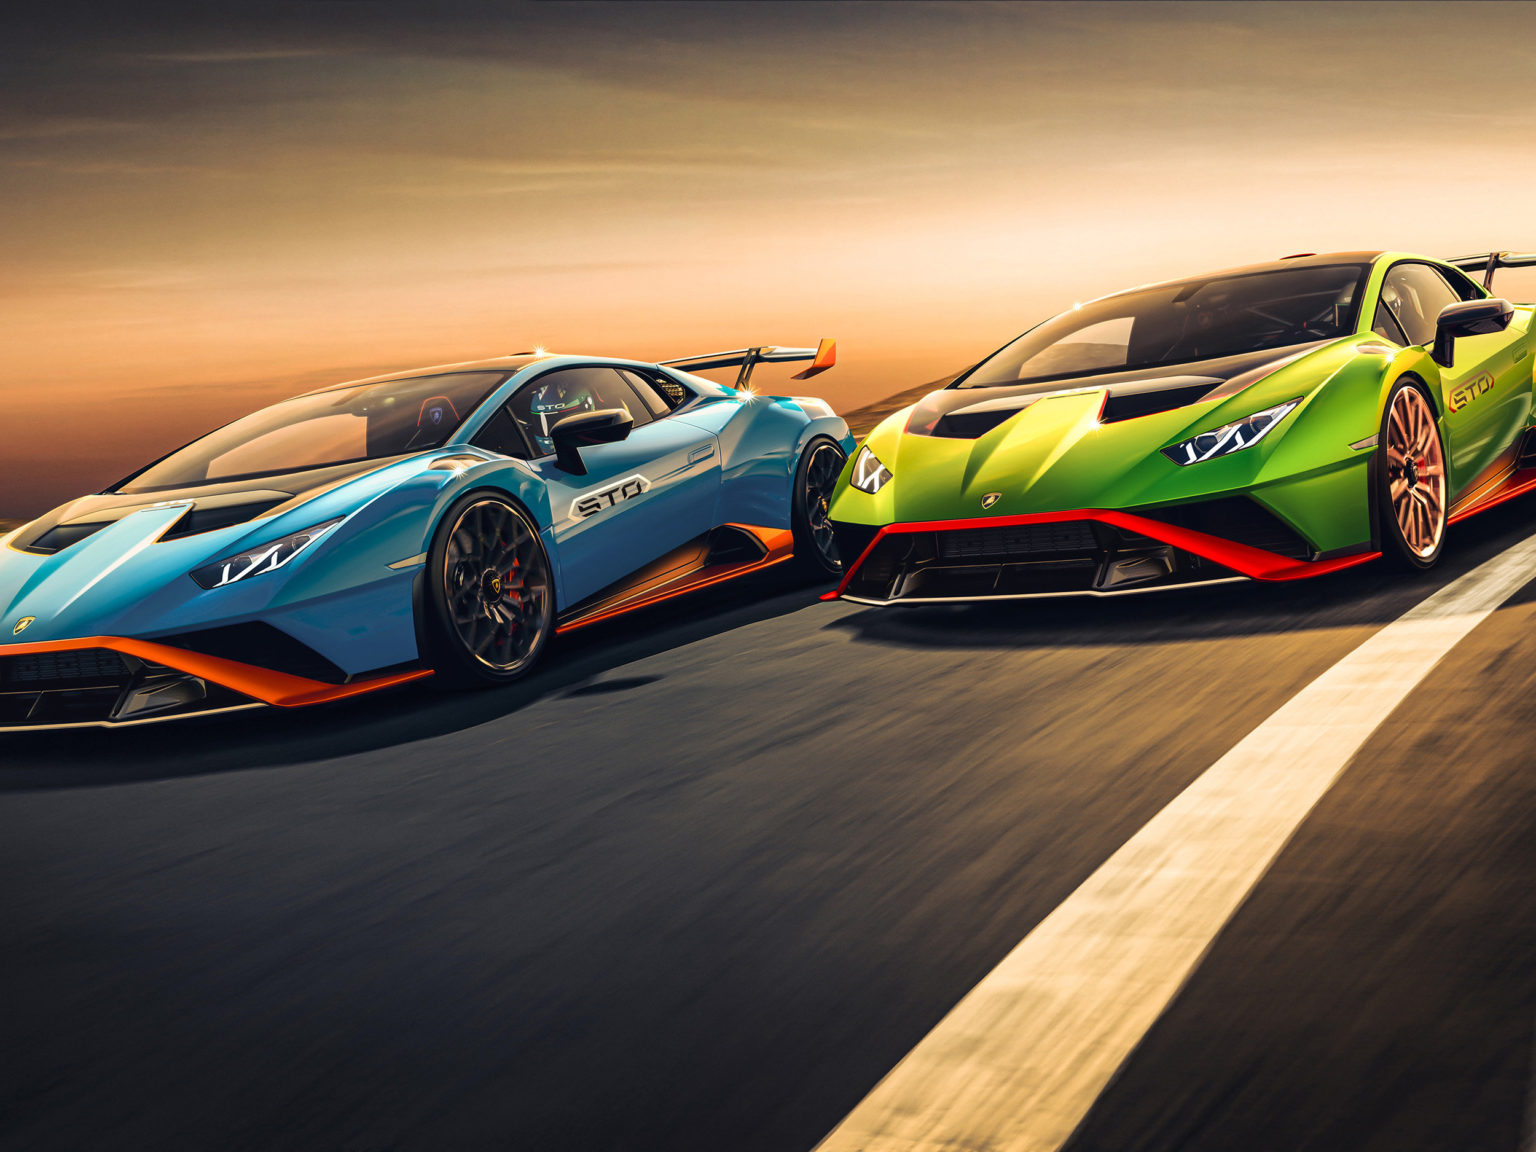 The Lamborghini Huracán STO is the latest addition to the popular Huracán lineup.